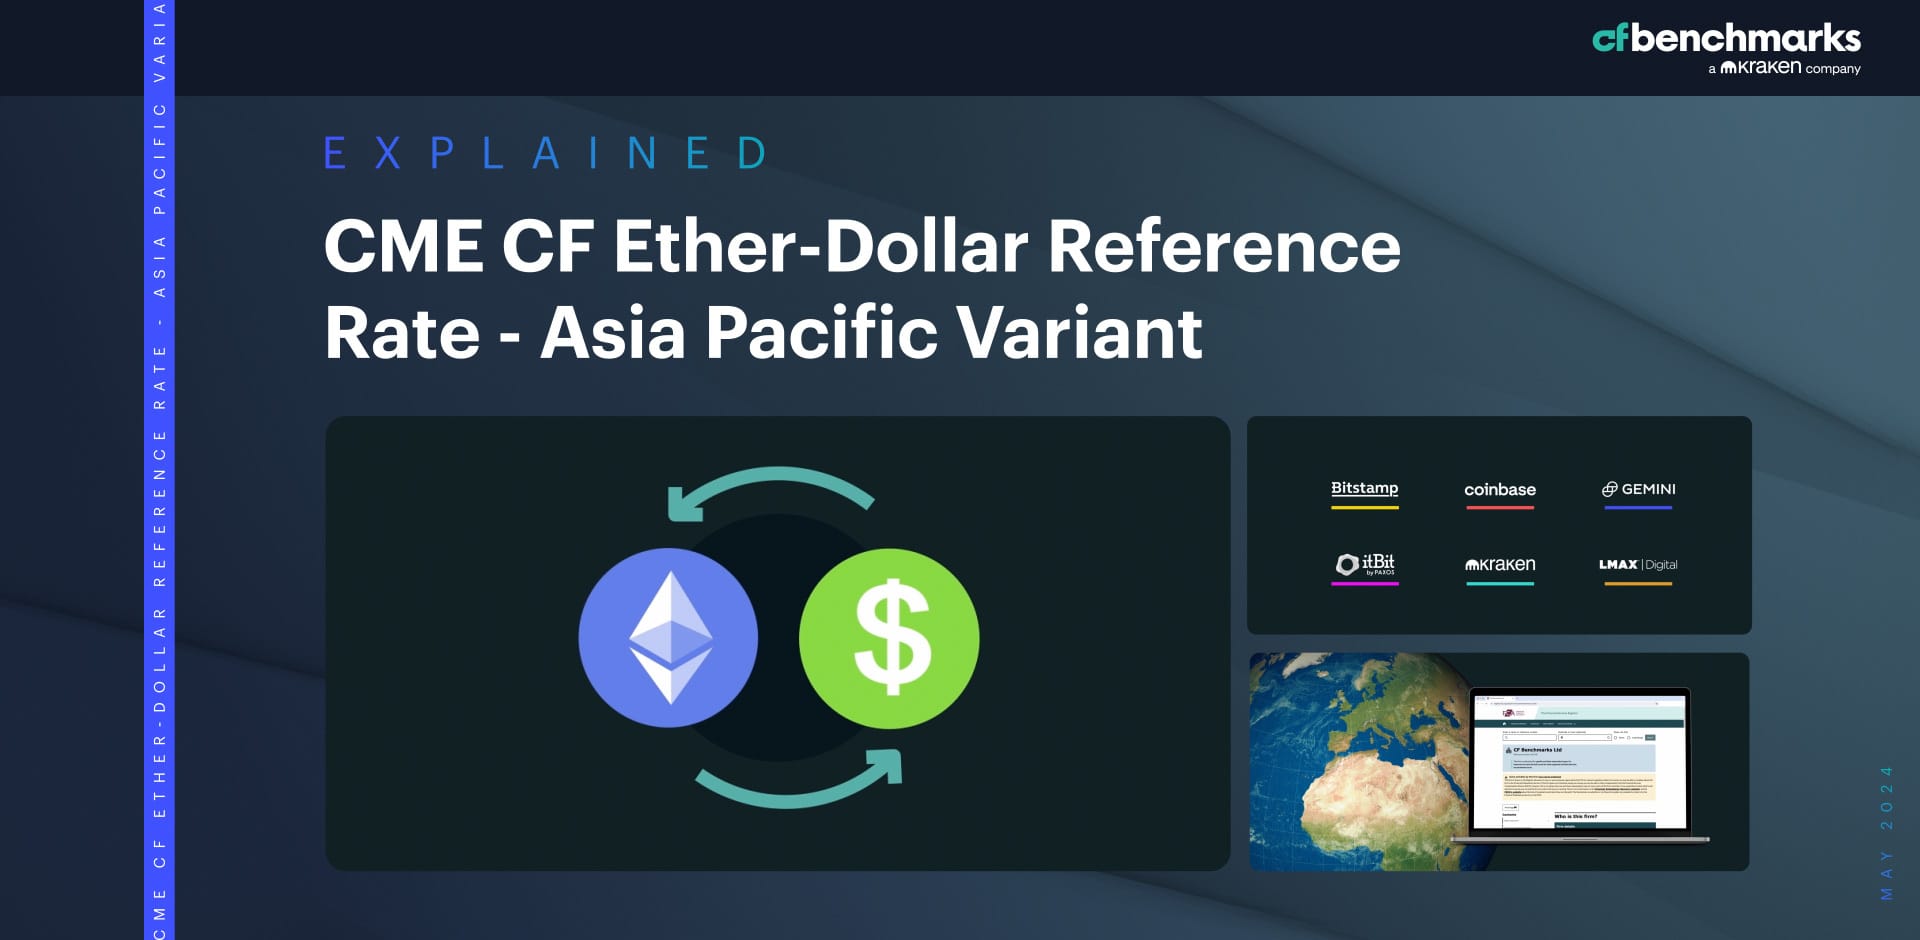 CME CF Ether-Dollar Reference Rate - Asia Pacific Variant: Explainer Video